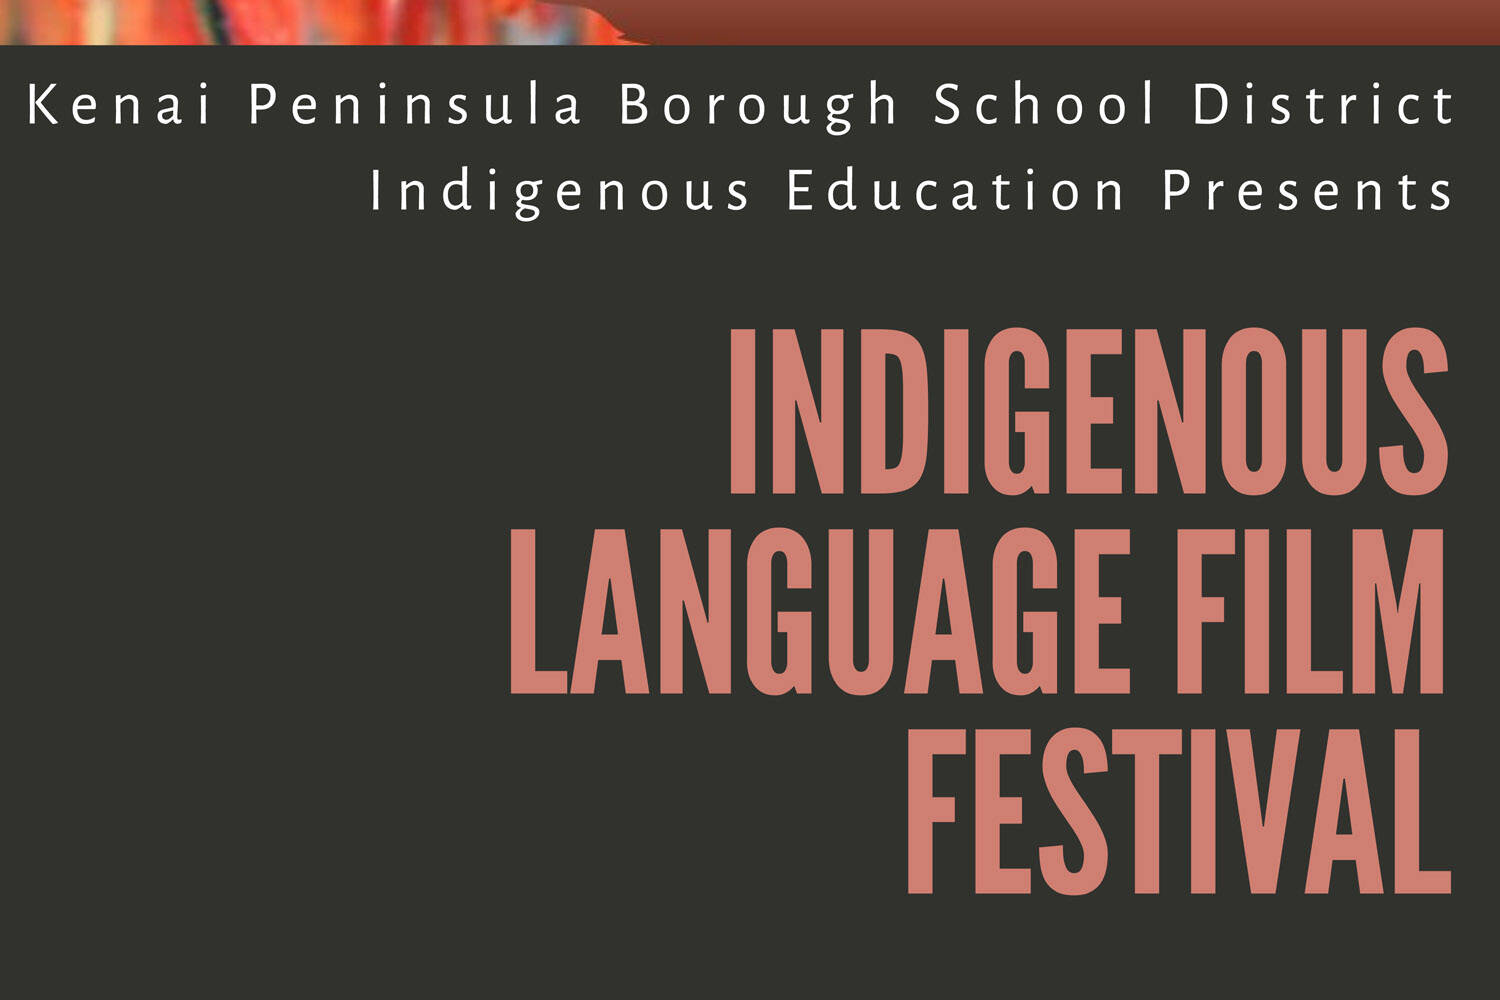 Poster for 2nd Annual Indigenous Language Film Festival. (Provided by Kenai Peninsula Borough School District’s Indigenous Education Progam)